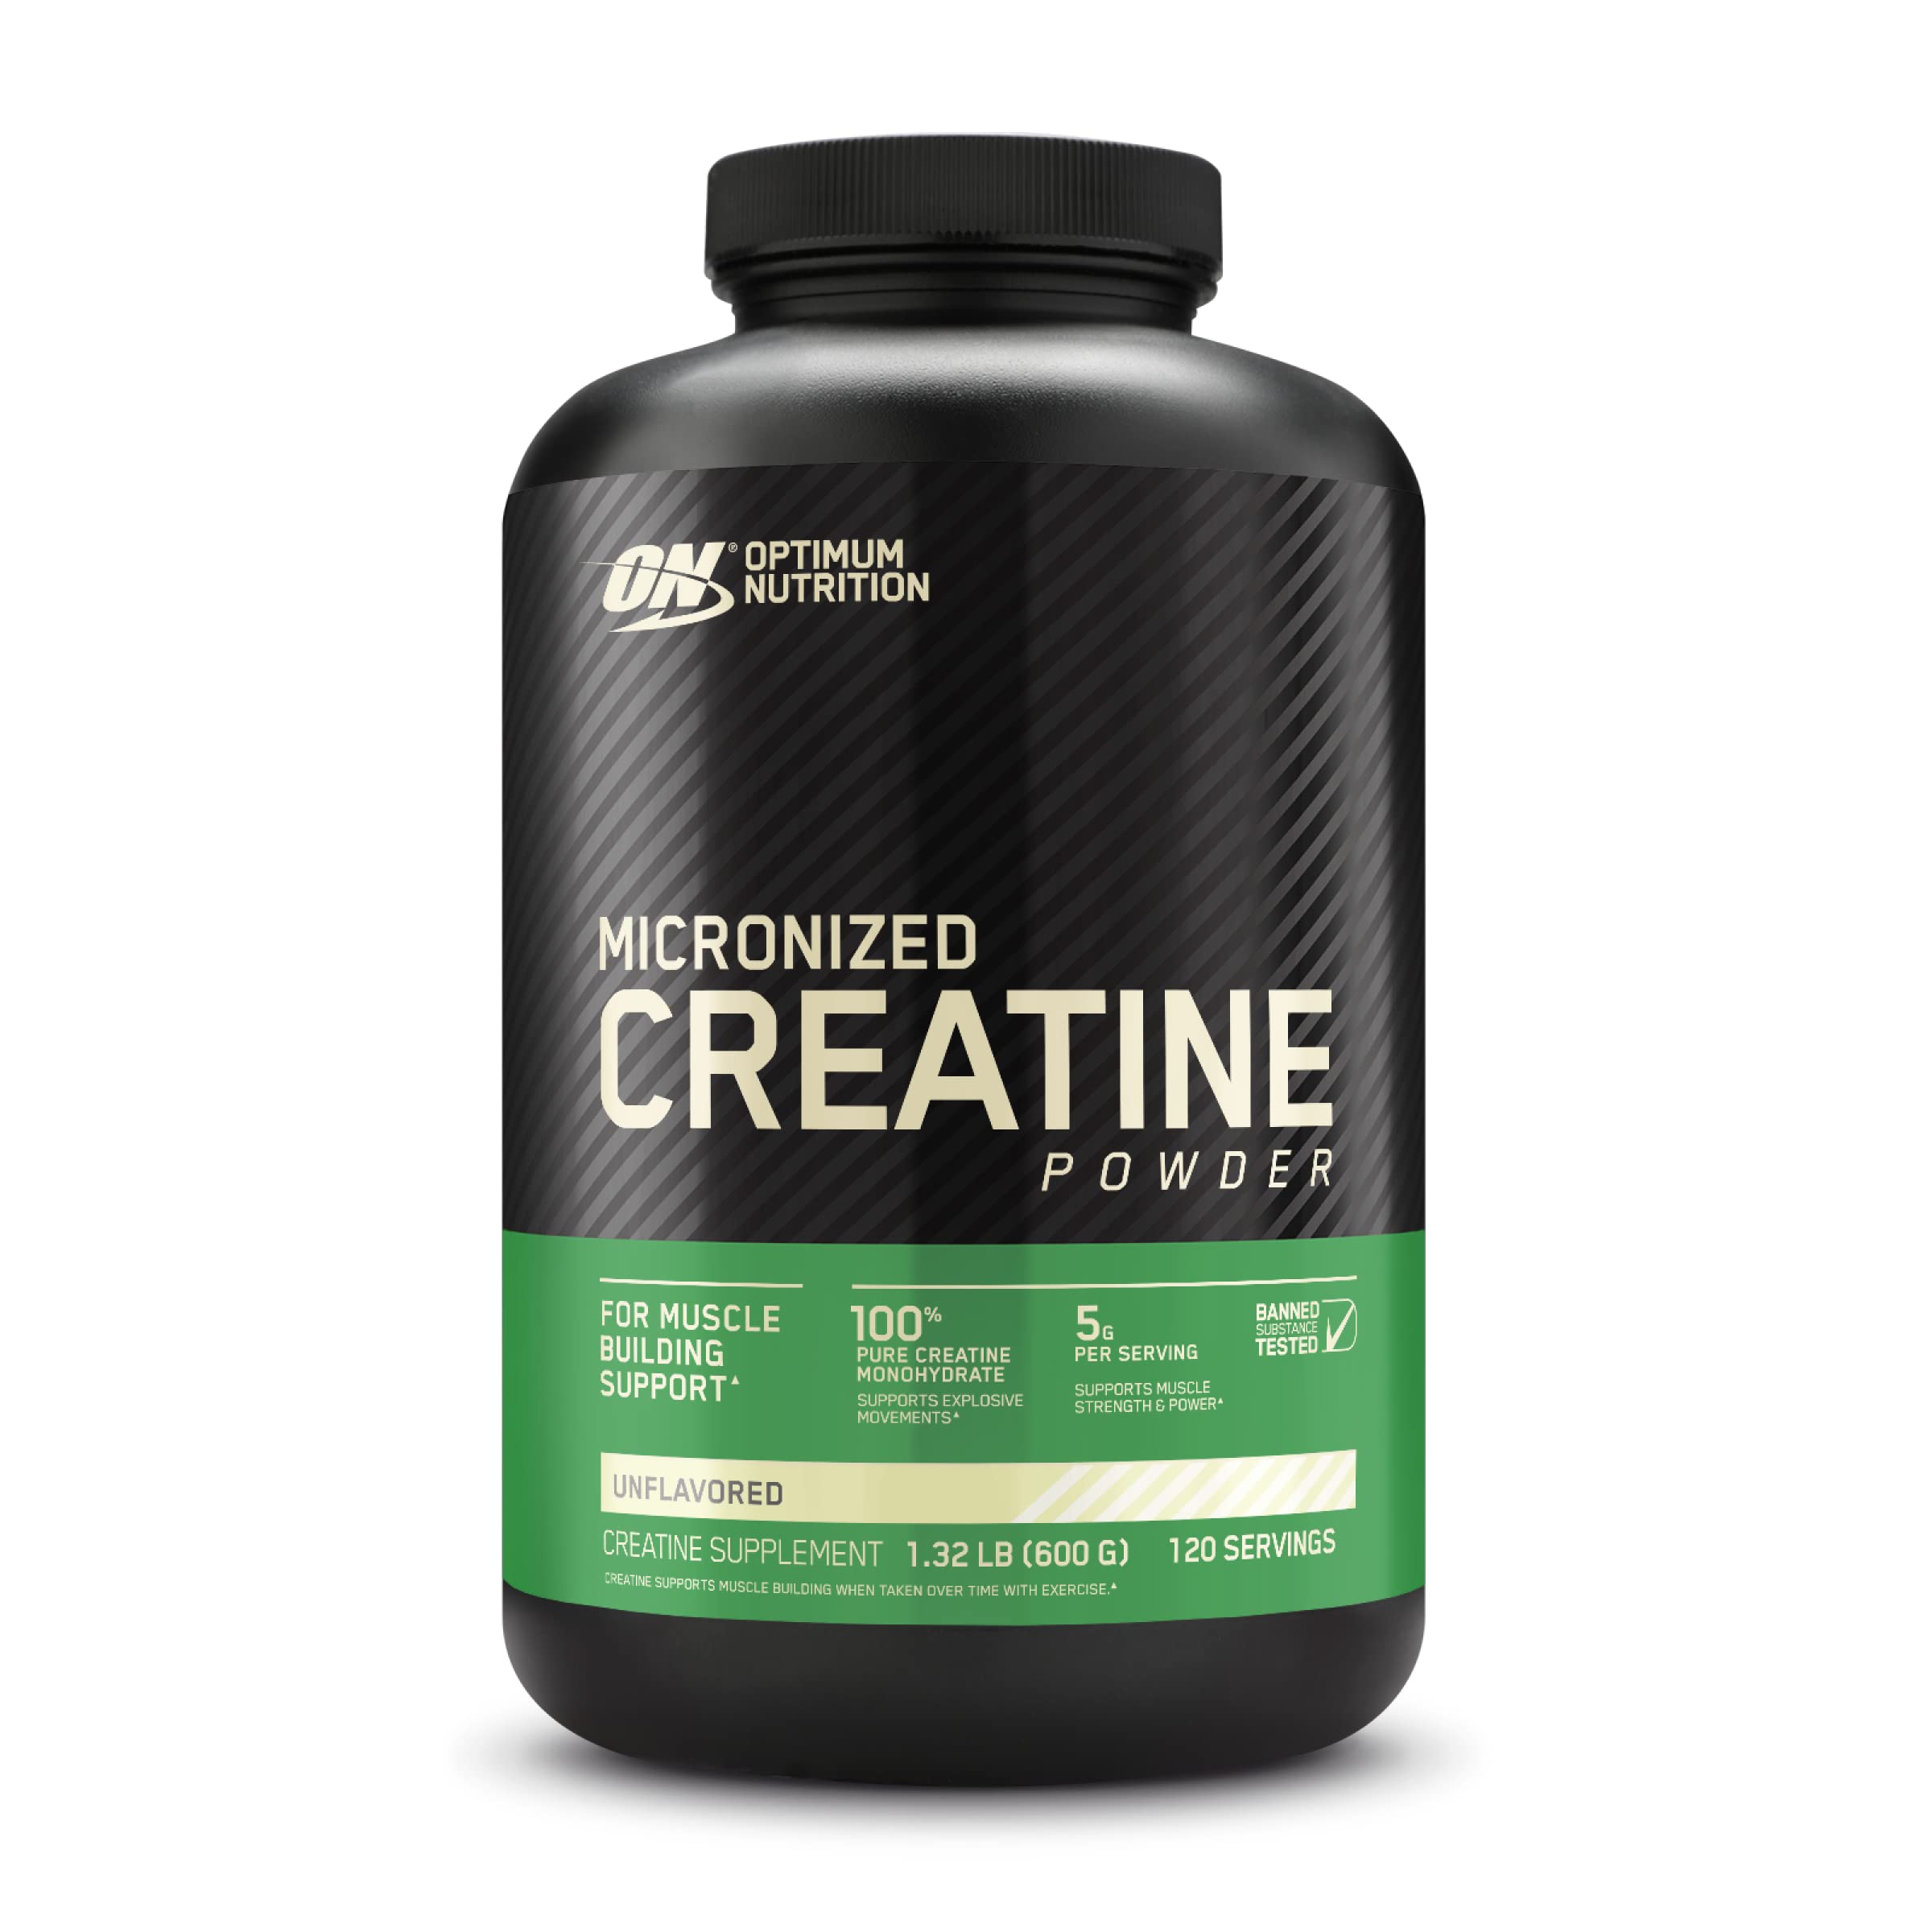 Optimum Nutrition Amino Energy - Pre Workout with Green Tea & Micronized Creatine Monohydrate Powder, Unflavored, Keto Friendly, 120 Servings (Packaging May Vary)